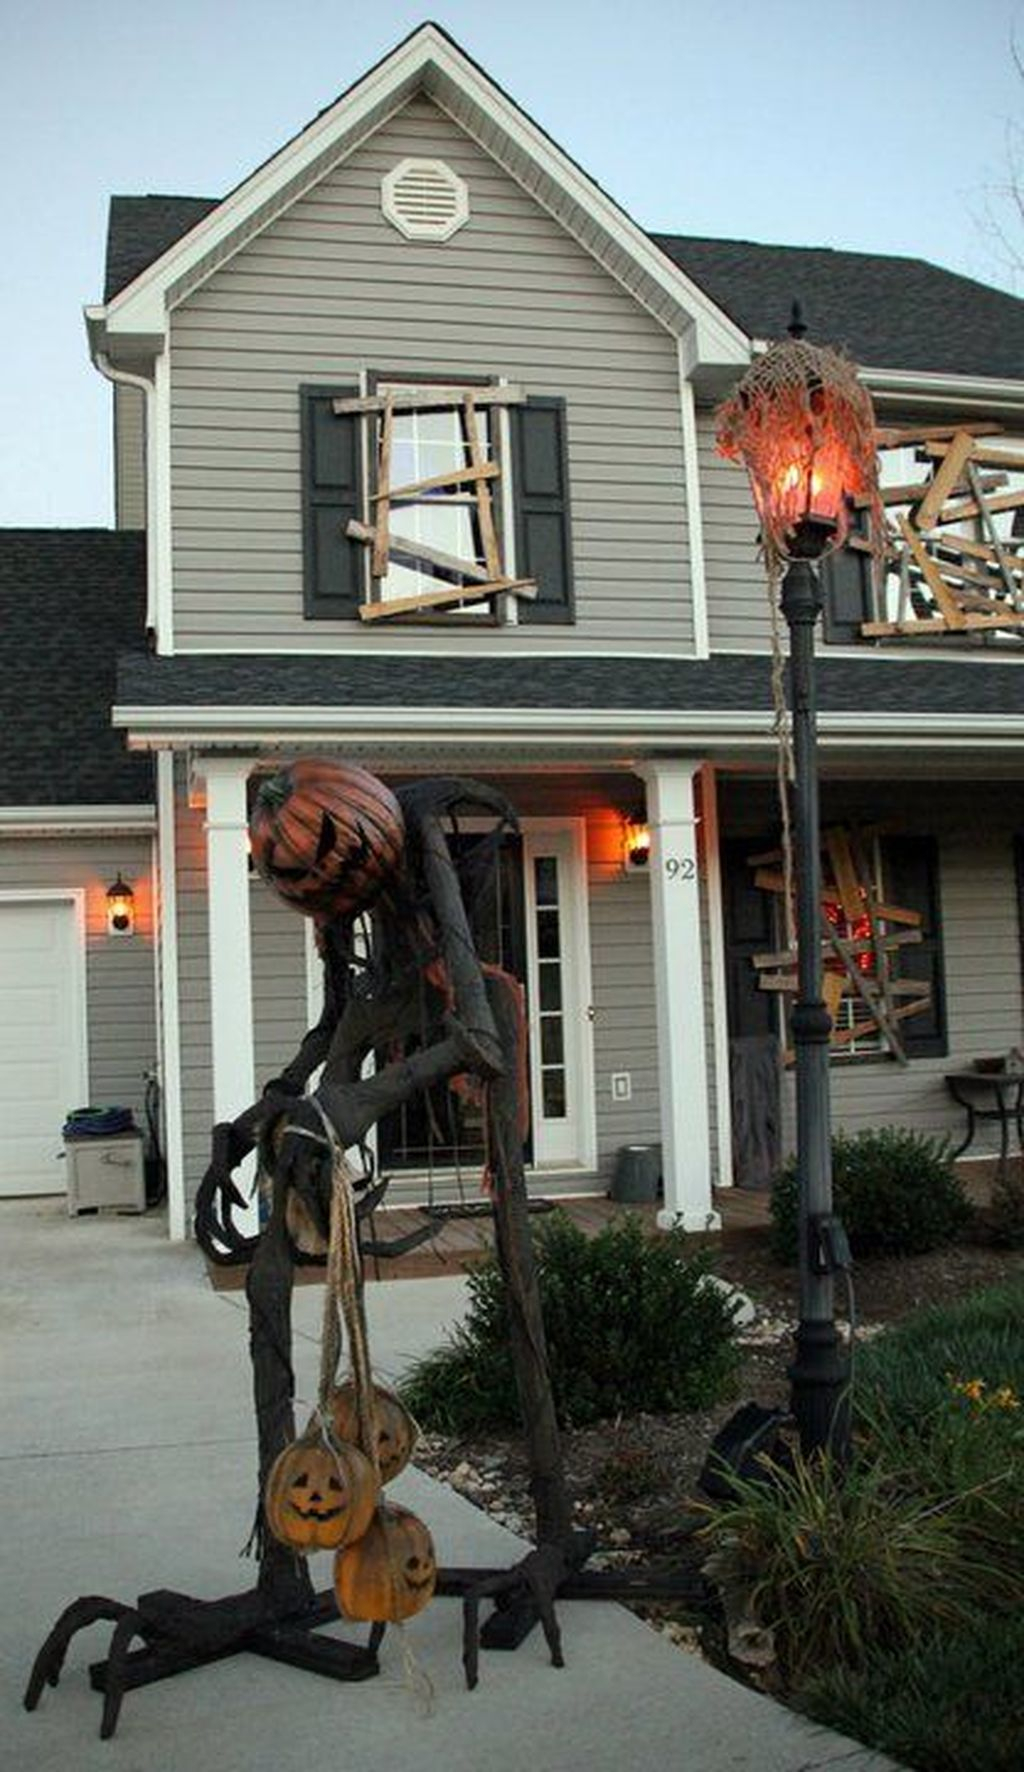 45 Top Halloween Outdoor Decorations To Terrify People - Top Halloween OutDoor Decorations To Terrify People 14